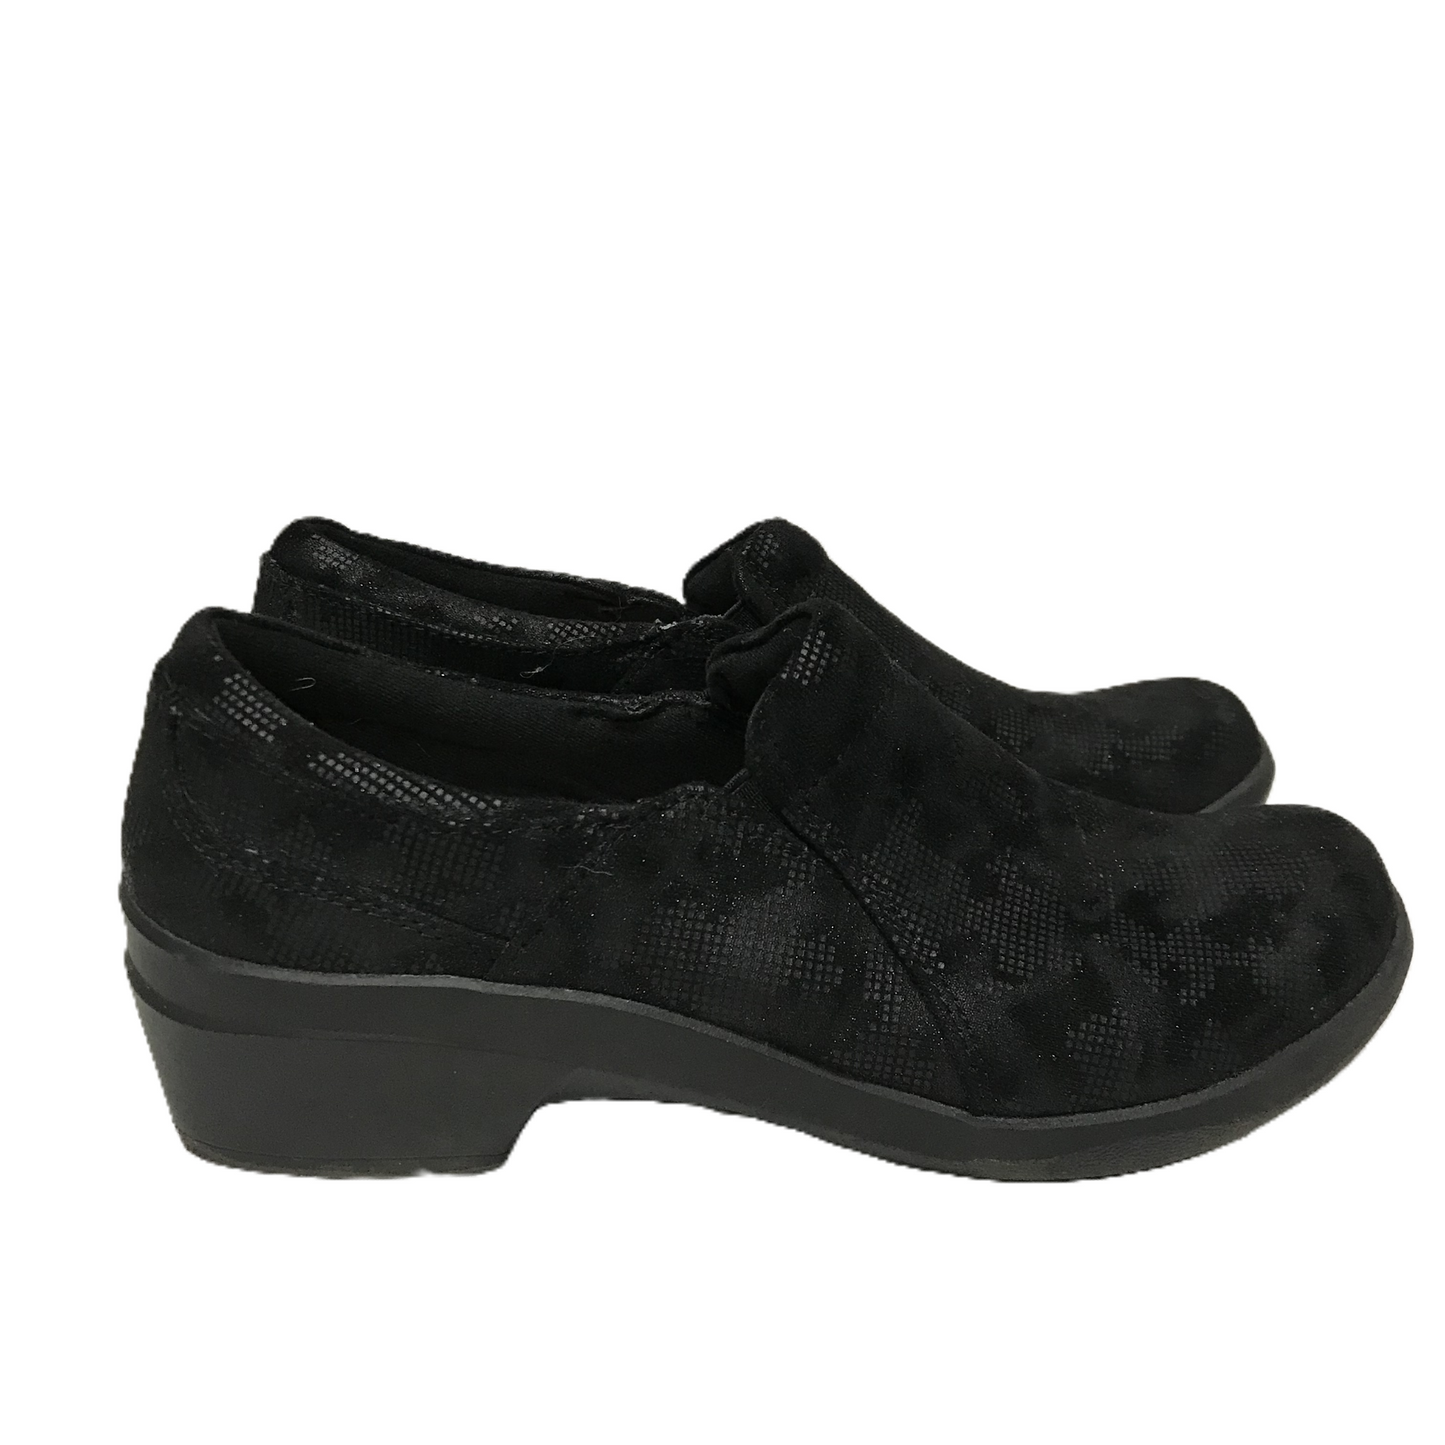 Black Shoes Flats By Clarks, Size: 7.5